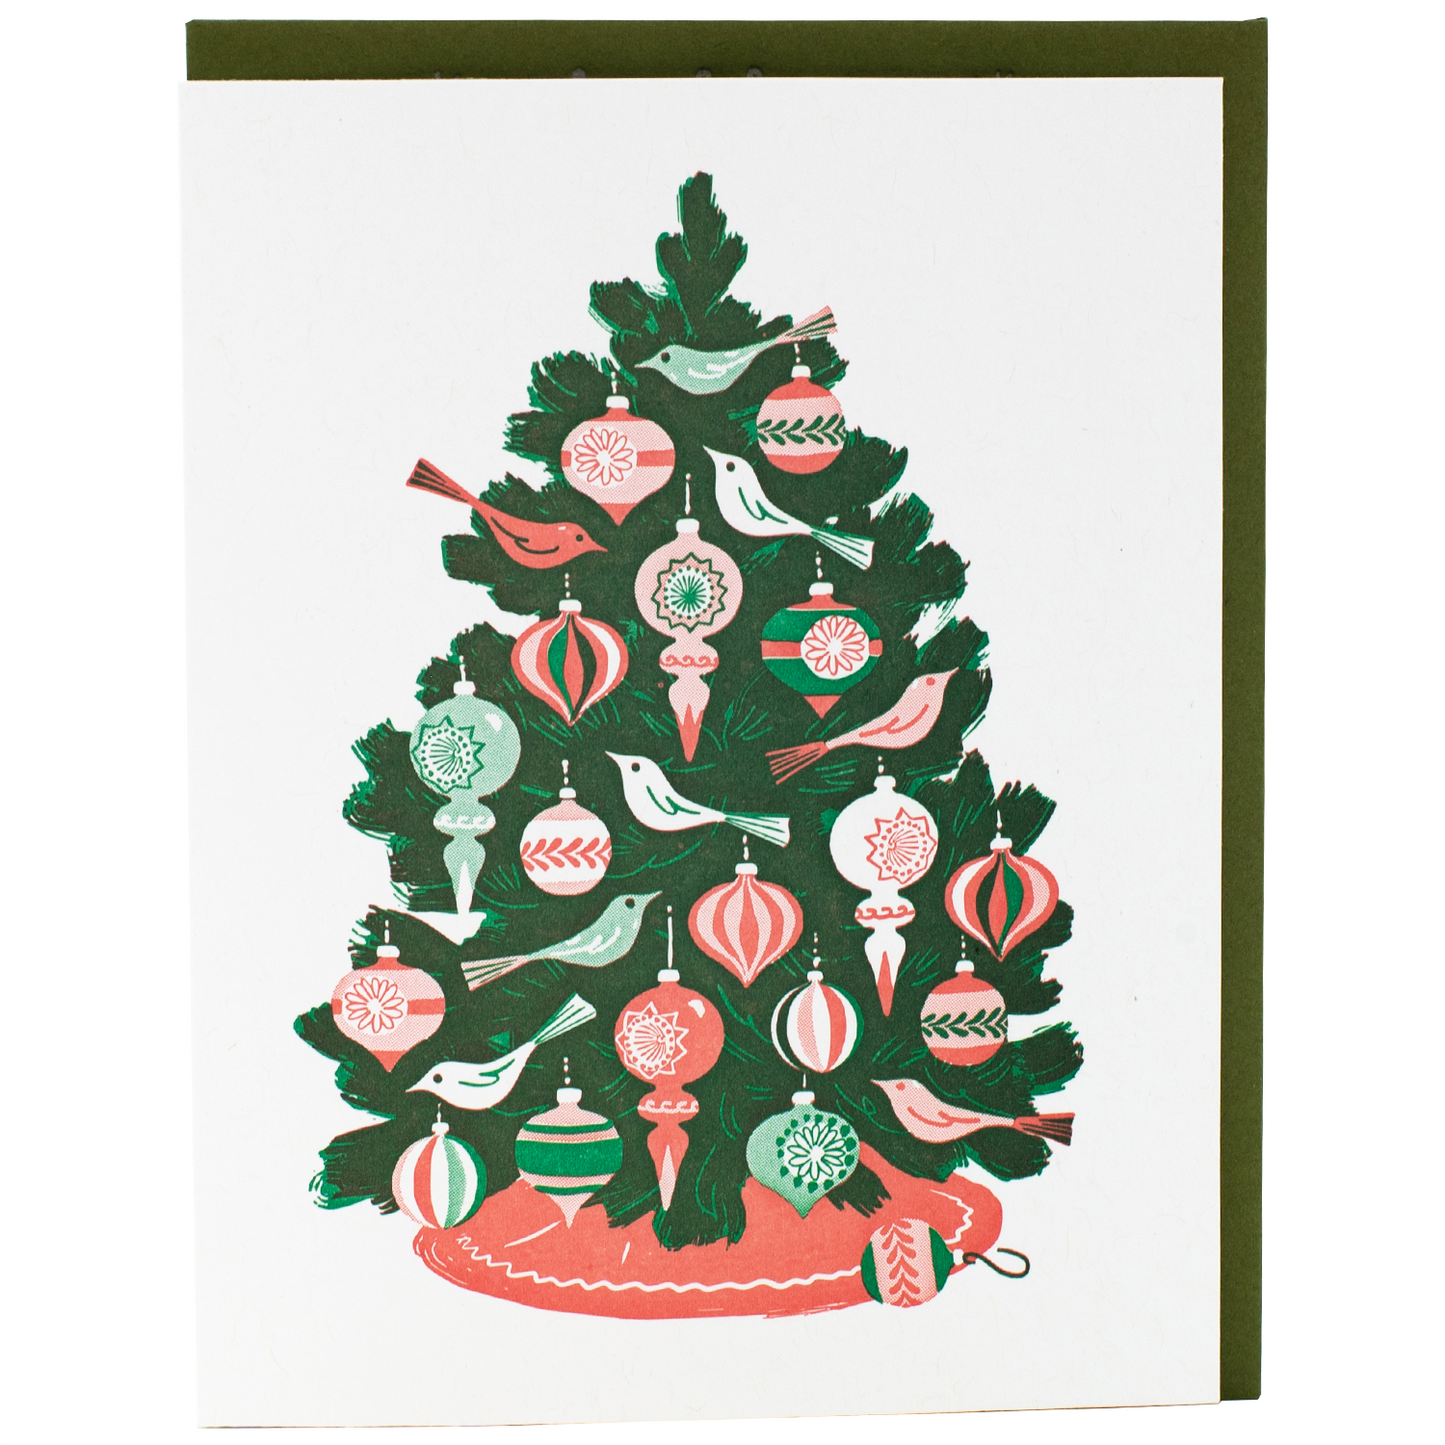 Festive Tree Christmas Card with Printed Envelope